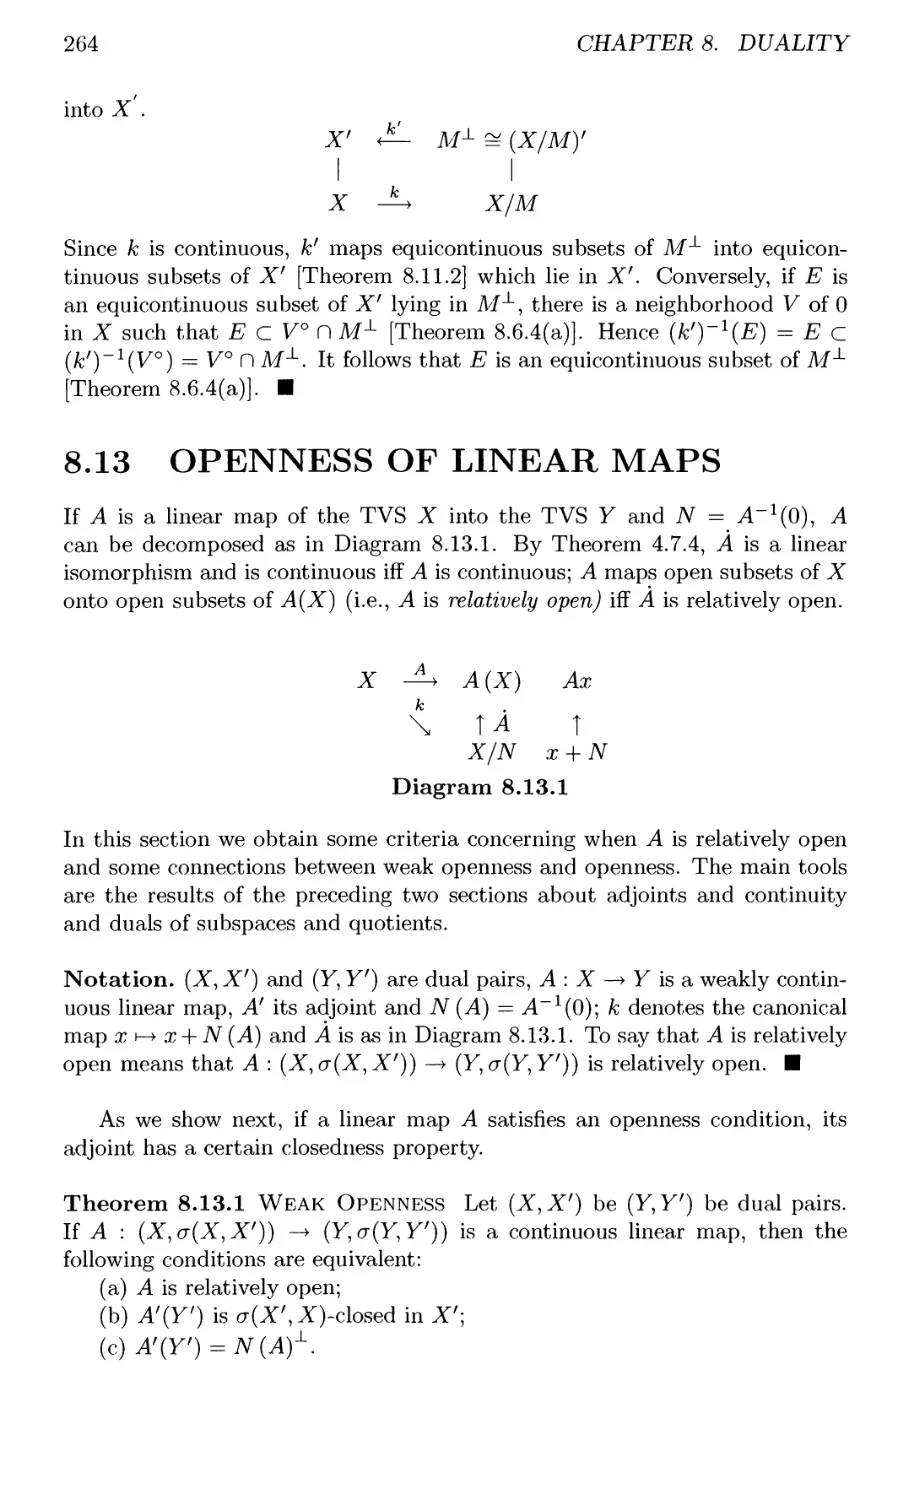 8.13 OPENNESS OF LINEAR MAPS